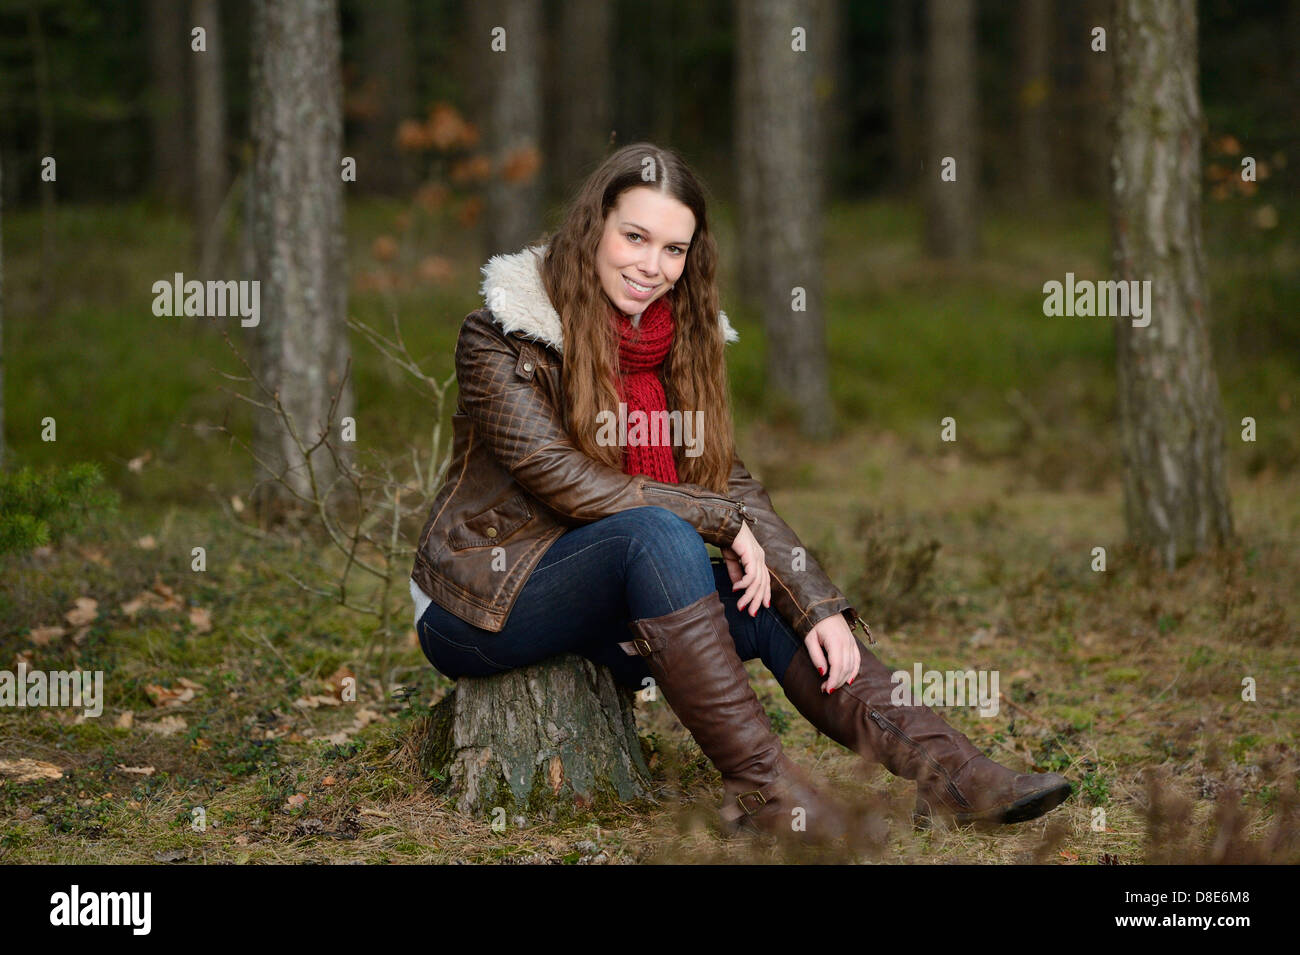 Smiling young woman in forest Banque D'Images